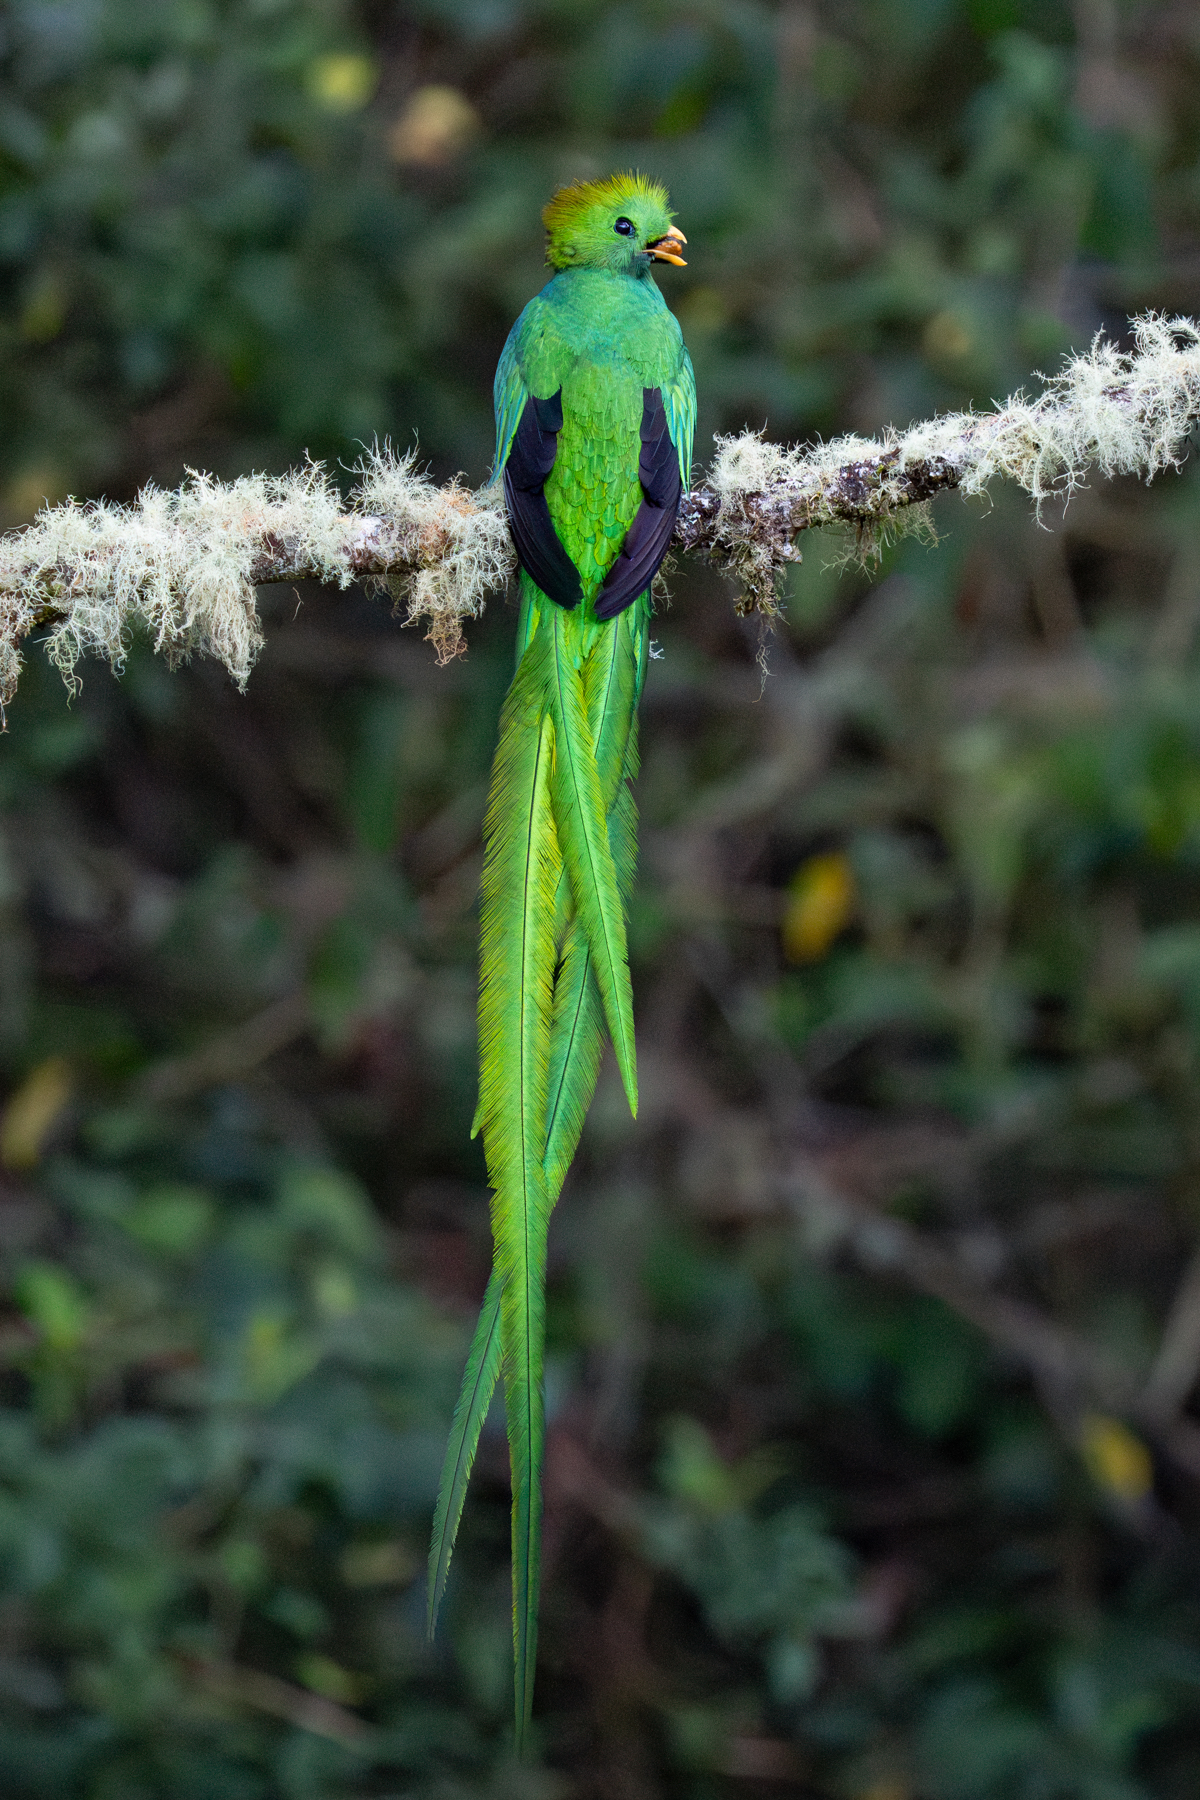 Stunning male Resplendent Quetzal with fruit (image by Inger Vandyke)